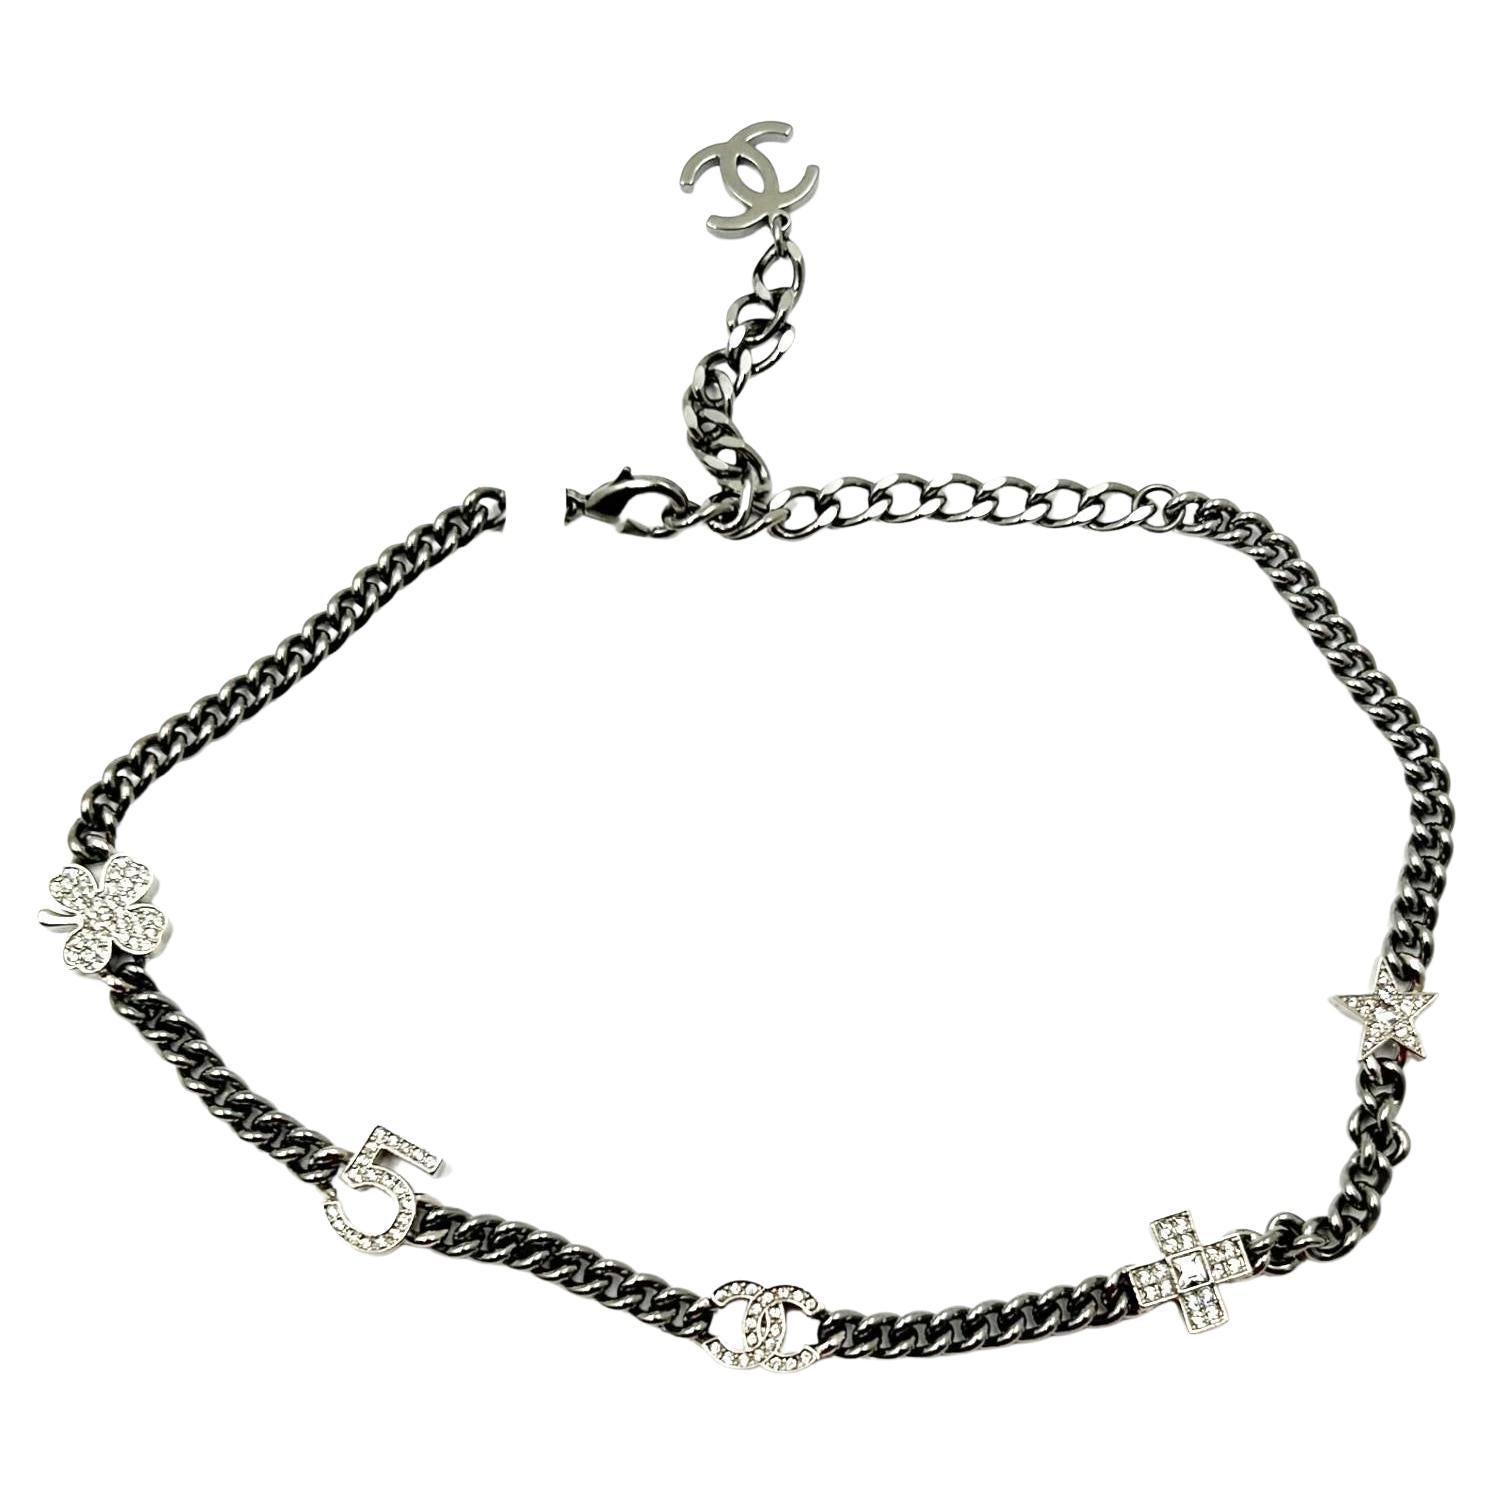 Chanel Brand 5 Charms Choker Necklace